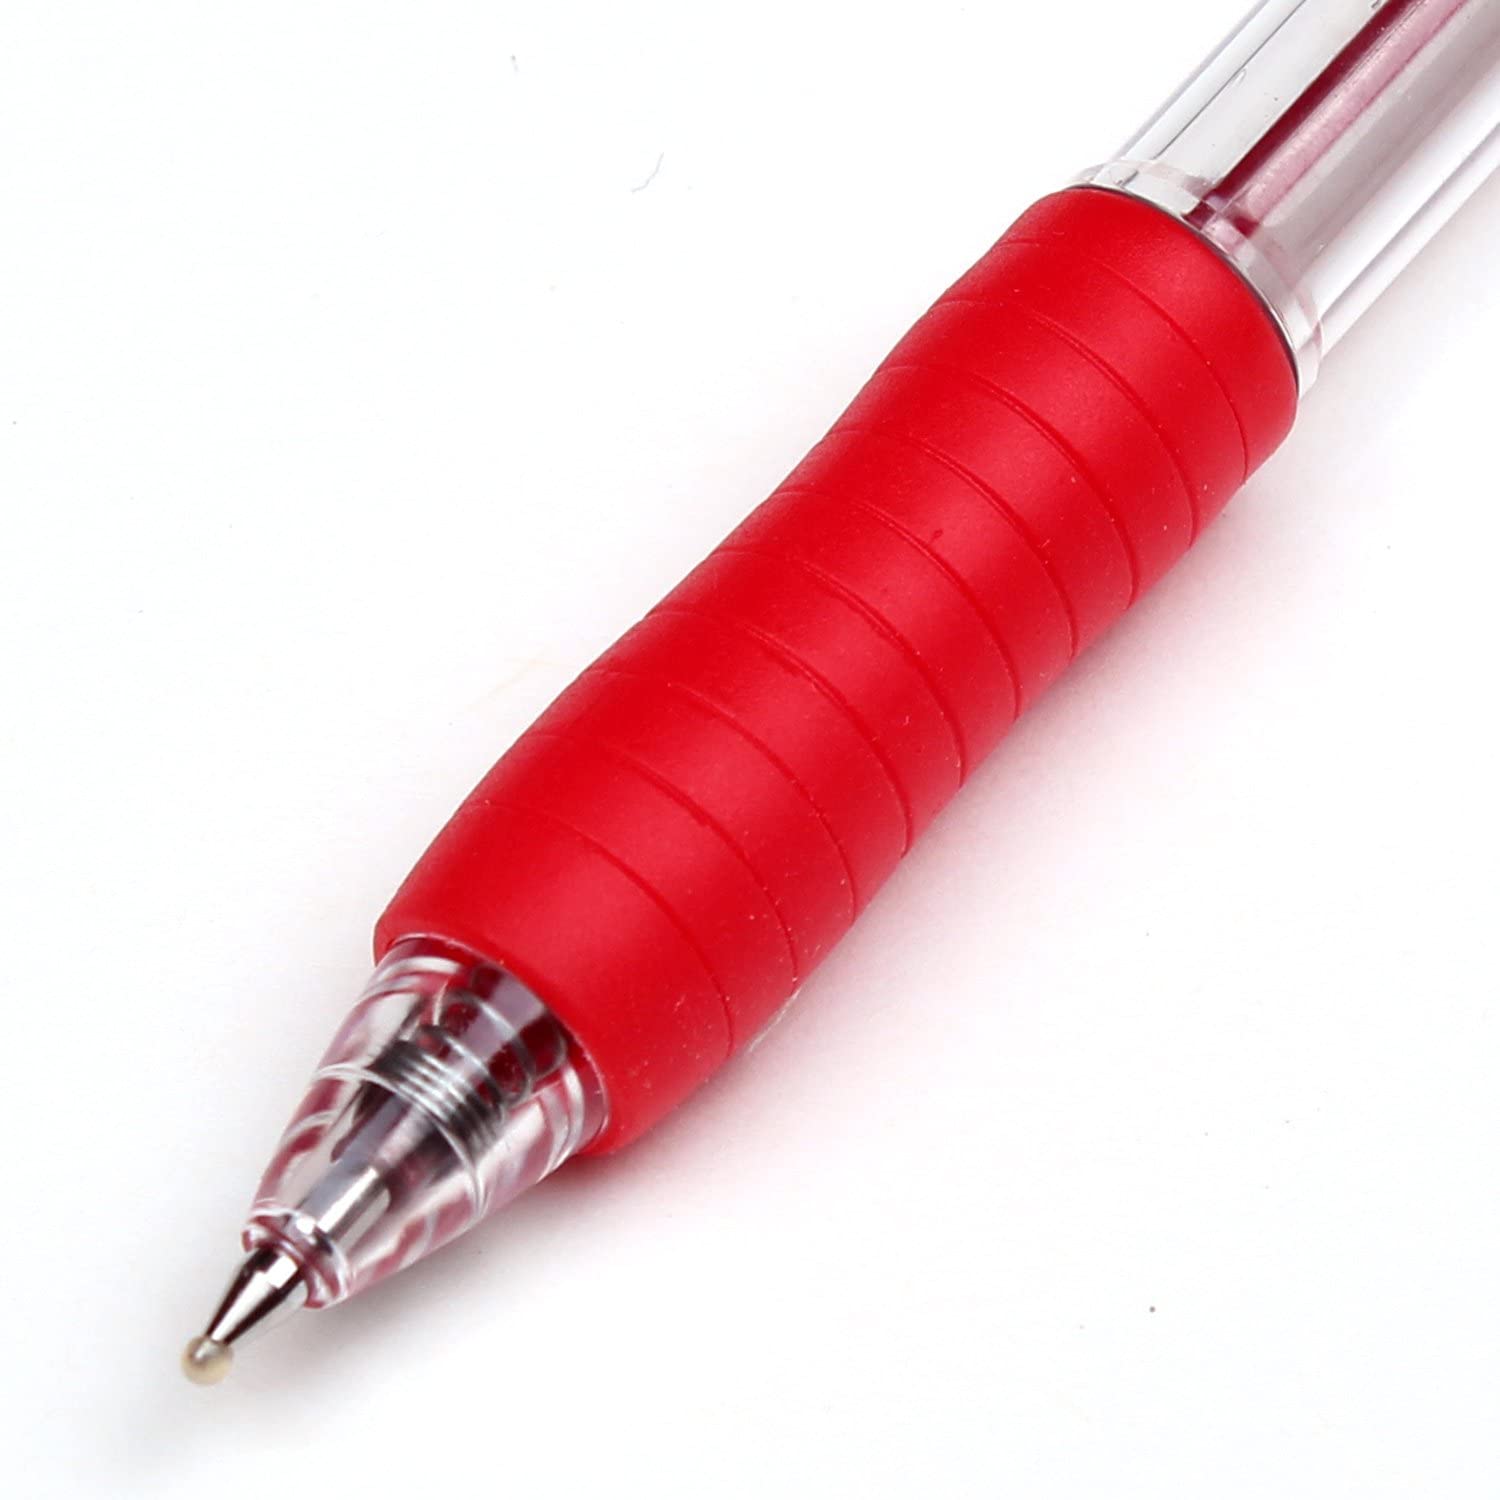 Dong A Anyball 501 0.7 mm Retractable Ballpoint Pens Red